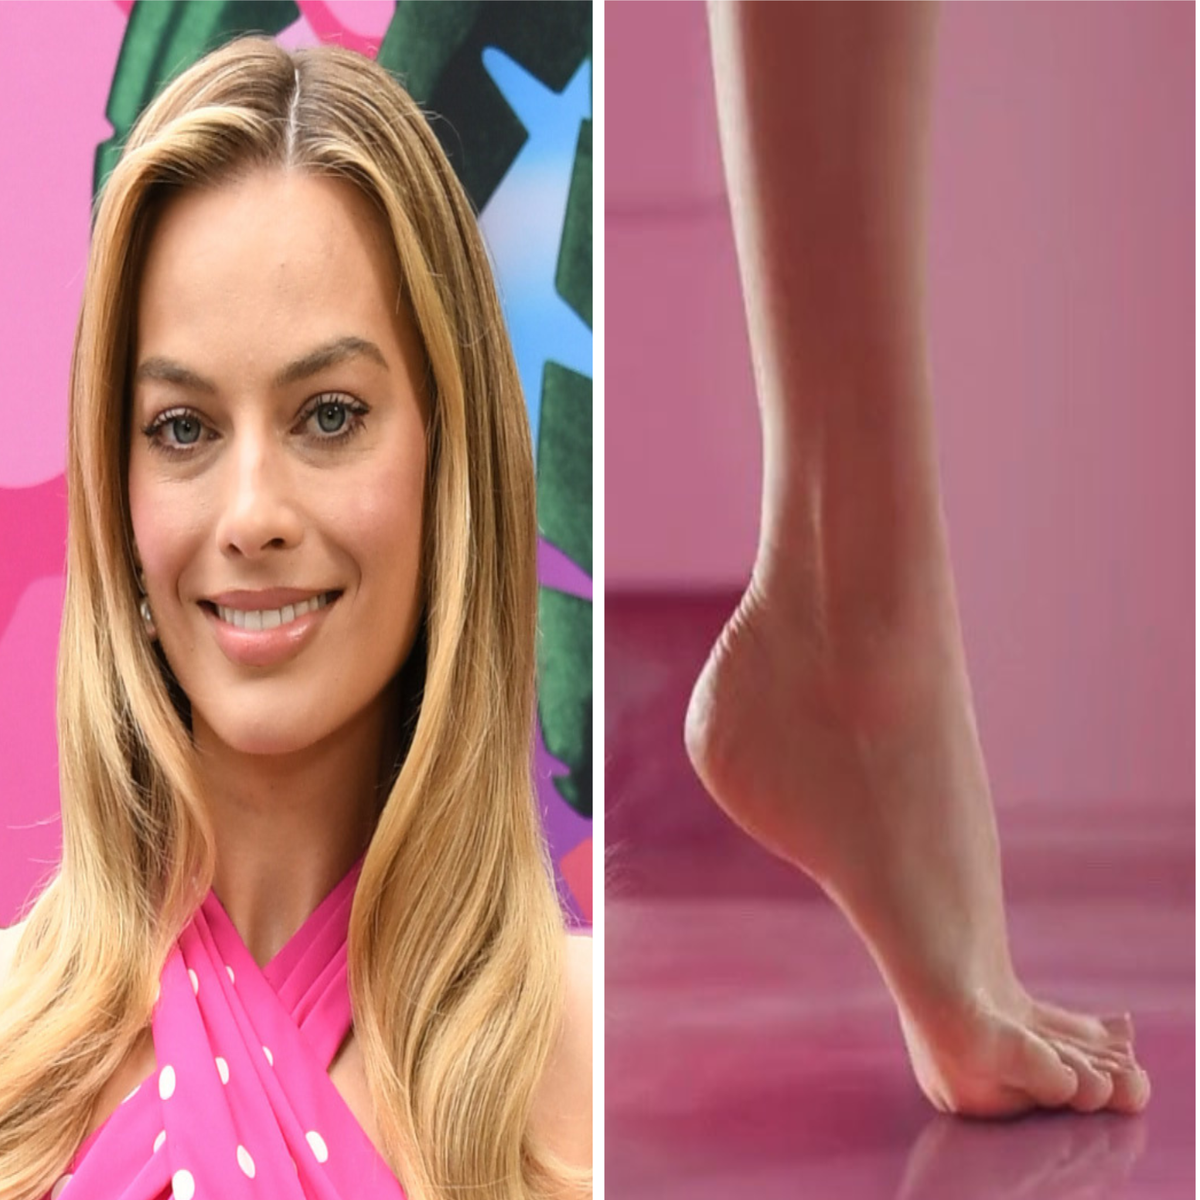 Barbie movie: Get the look with these high street pink heels